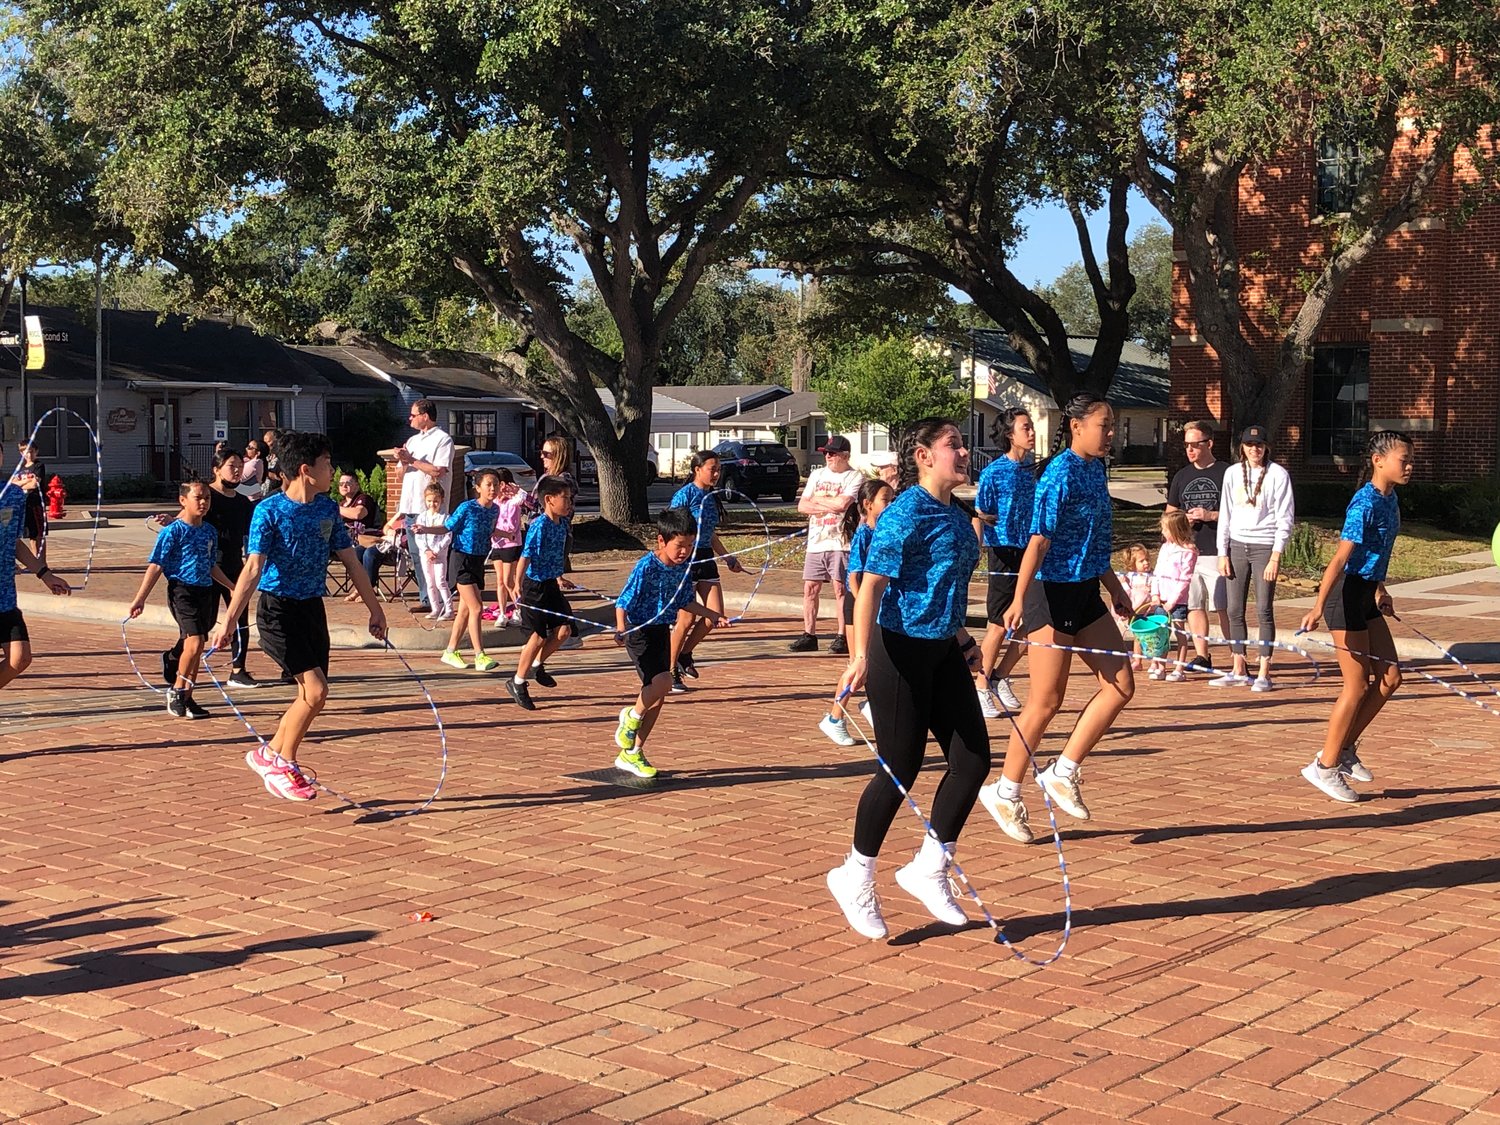 The Katy Rope Warriors demonstrated their skill at the parade.